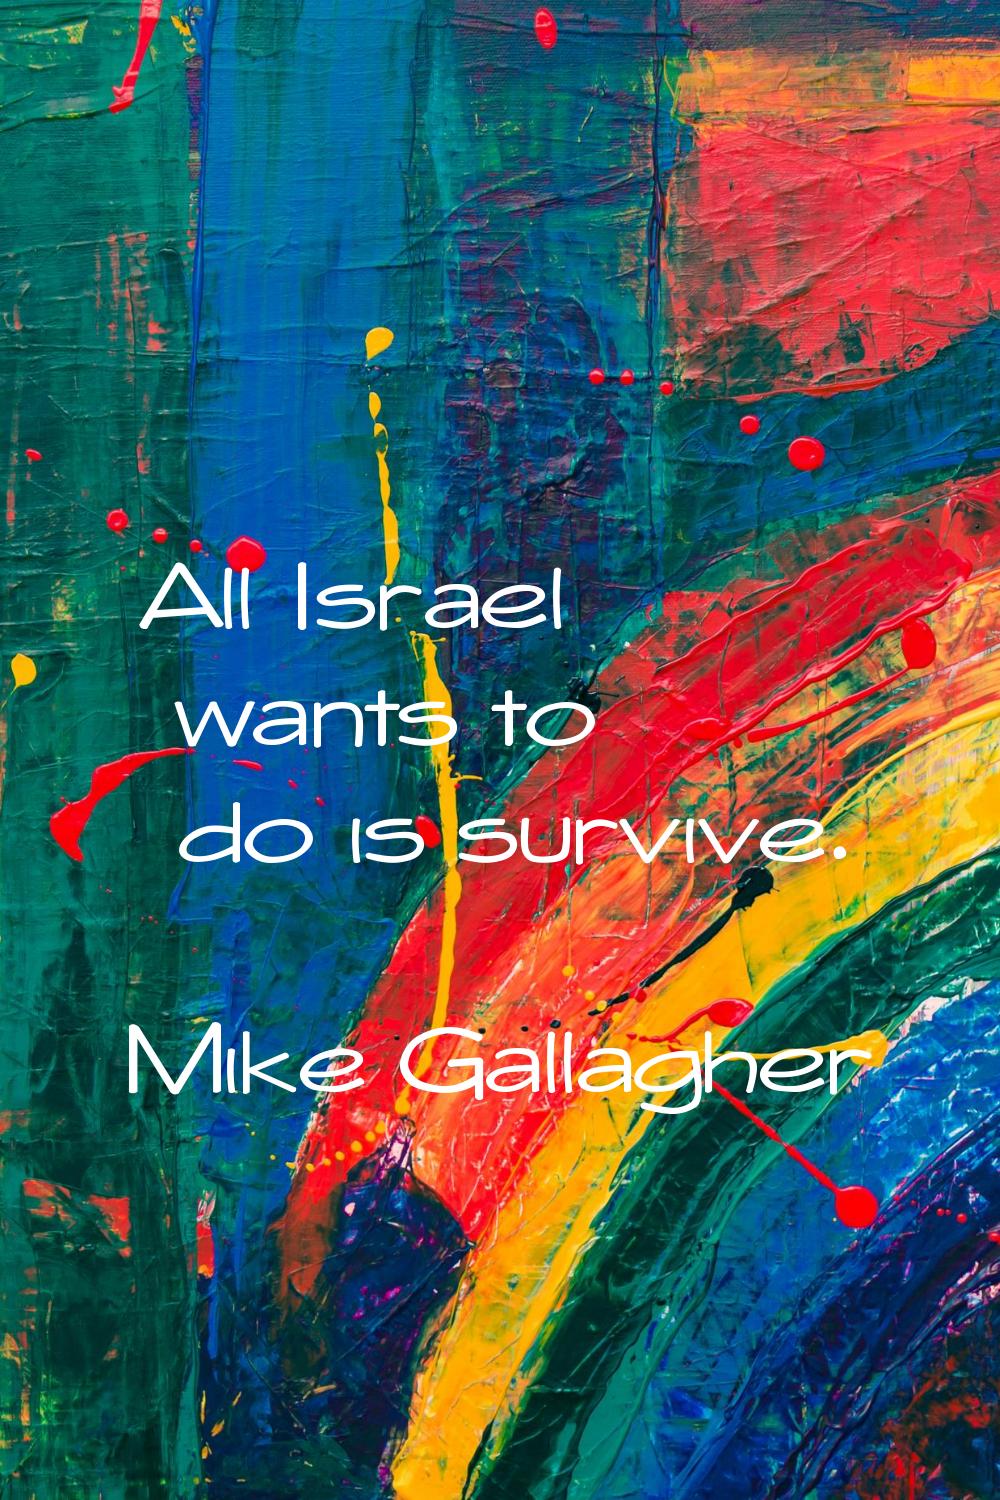 All Israel wants to do is survive.